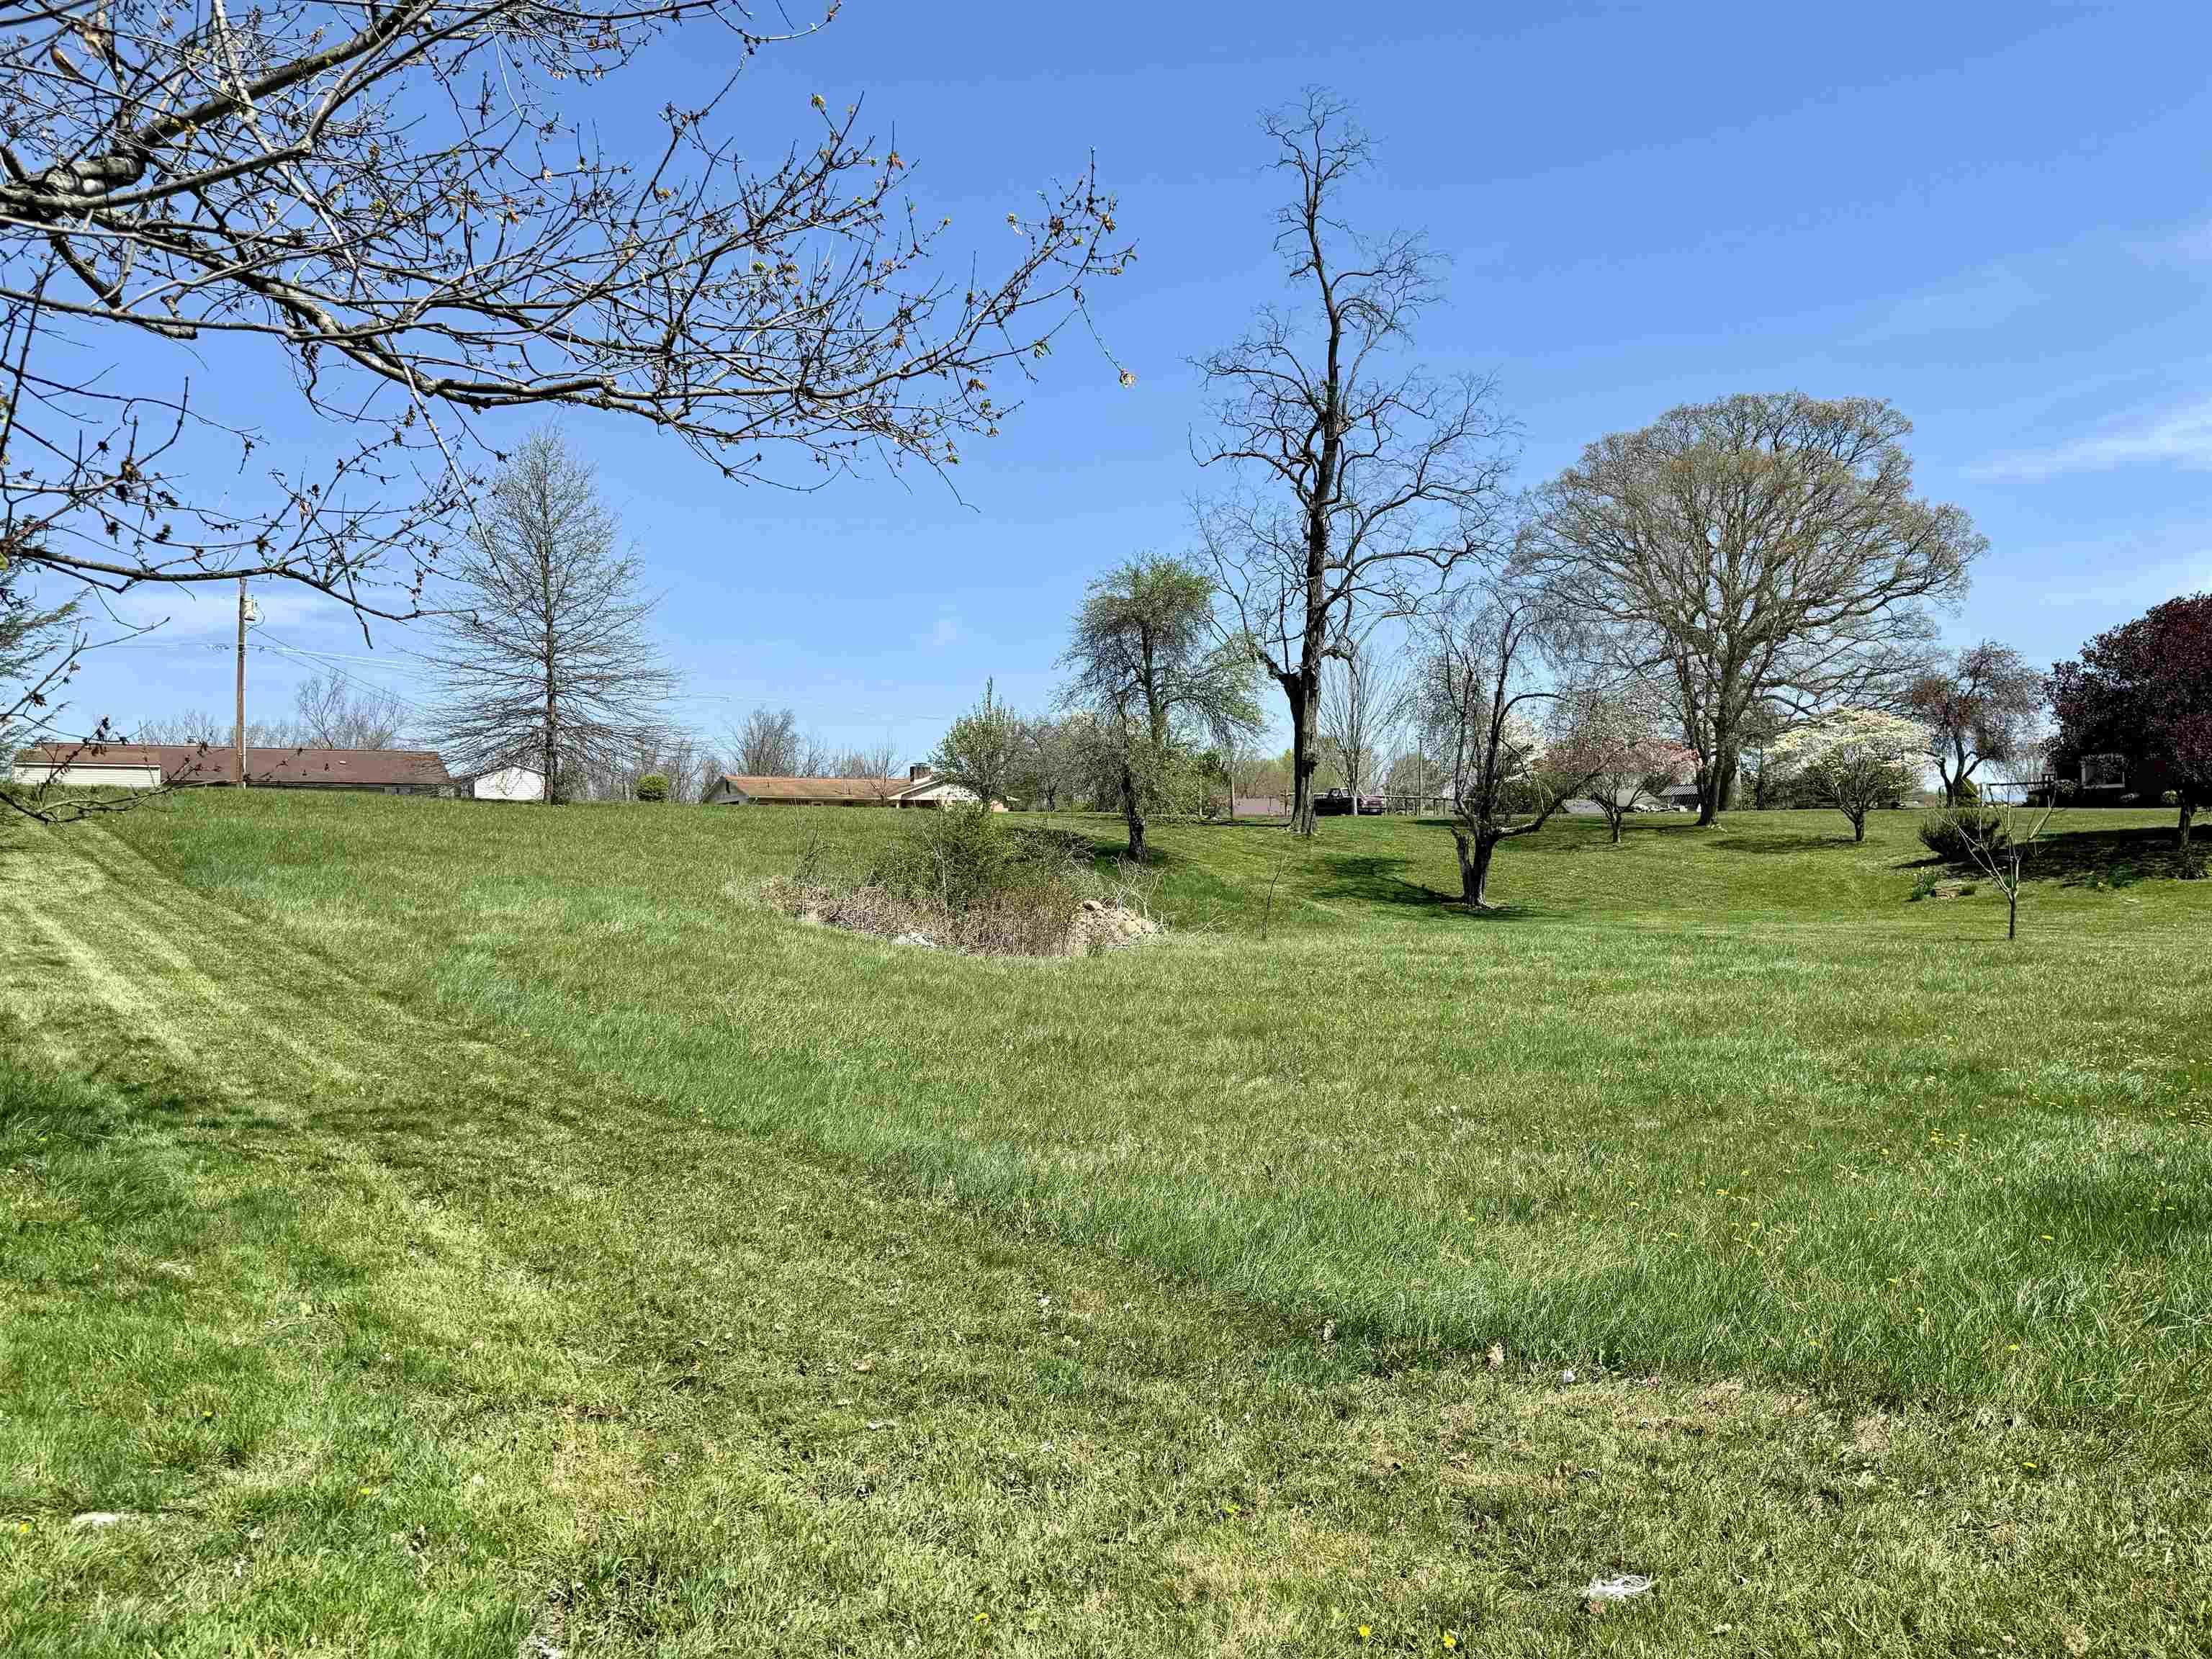 Are you ready to build your dream home on a quiet dead end street in Dublin?  Look no further than this lot!  This vacant lot is located on a Dublin street (just outside the Dublin town limits) with nice existing homes.  Measuring 1/2 acre, this cleared lot is just waiting for a homeowner or investor to build on.  No singlewides or doublewides allowed.  Conveniently located 1/2 mile from Lee Hwy/Rt 11, this is a great location!  Lots of dining and shopping options within a few miles.